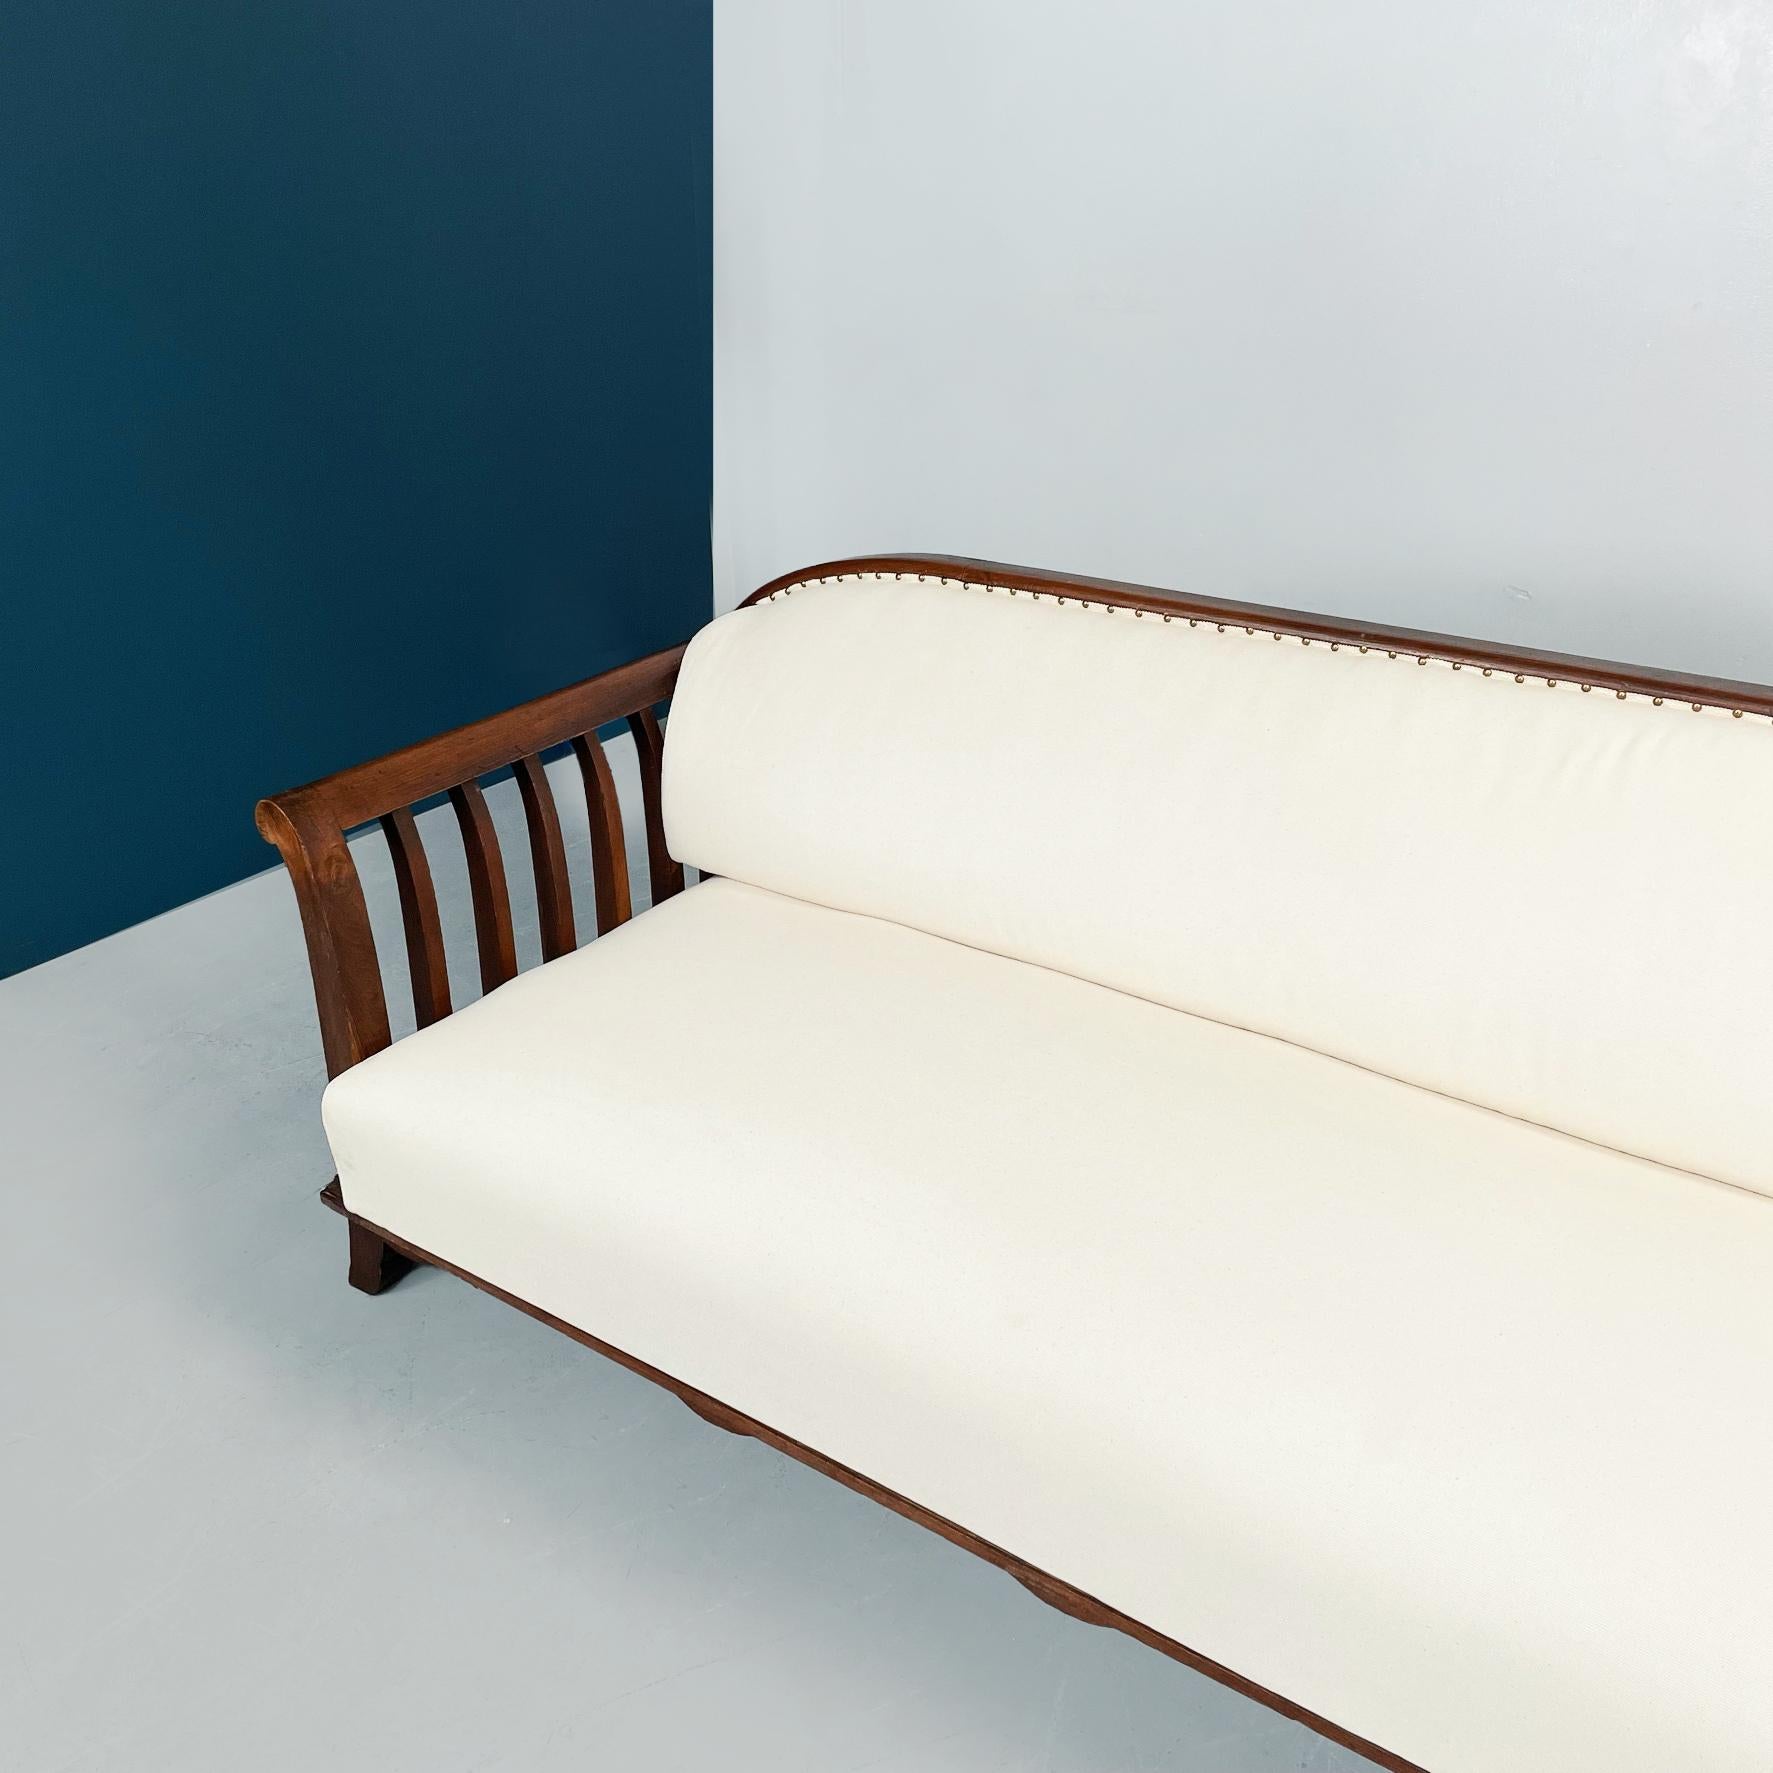 Italian Modern Wooden Sofa with White Fabric, 1940s For Sale 1